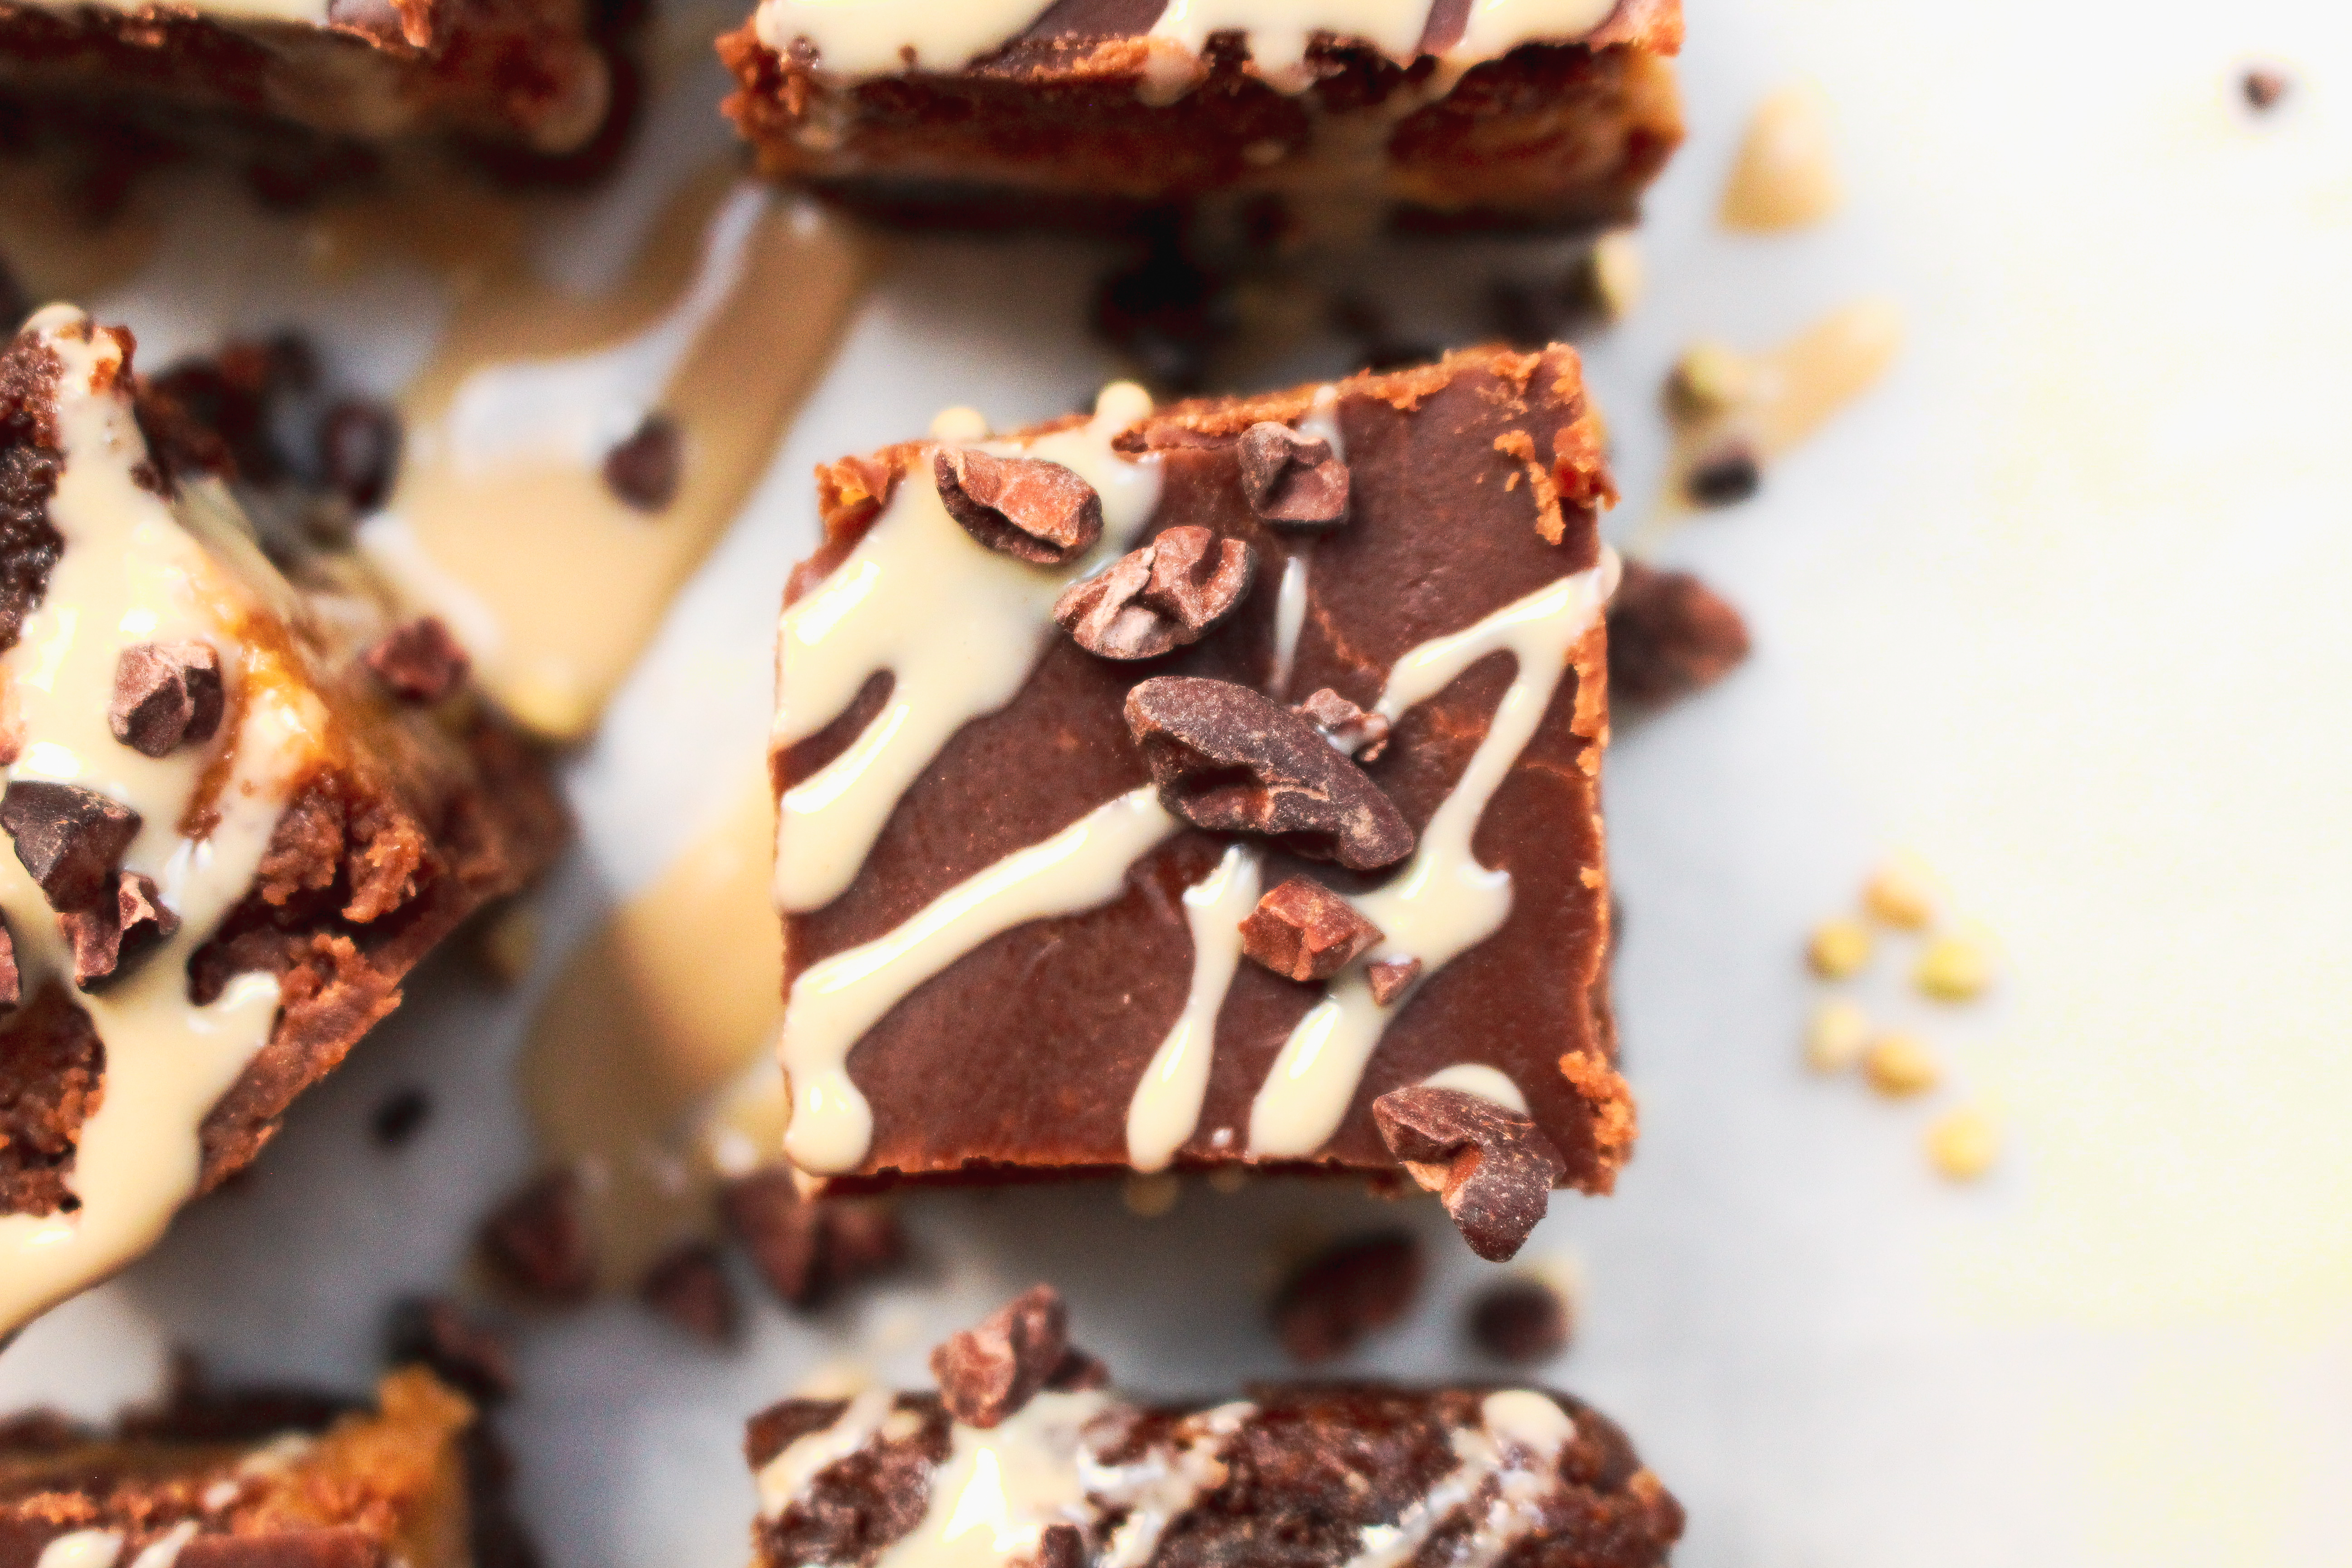 Peanut Butter Coffee Crunch Chocolate Slices